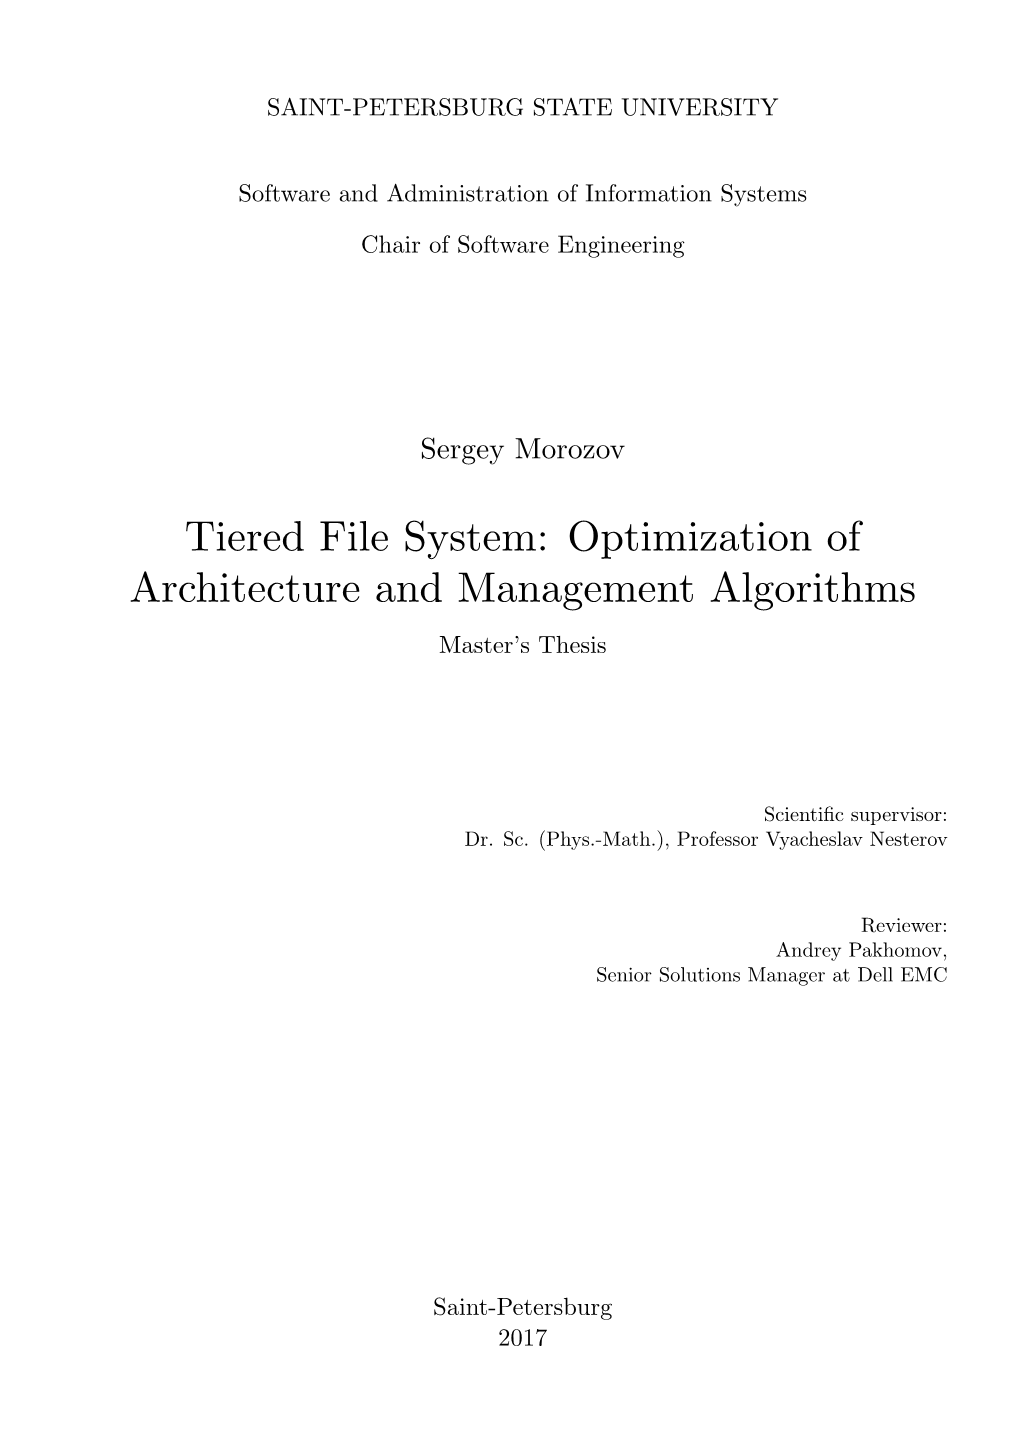 Tiered File System: Optimization of Architecture and Management Algorithms Master’S Thesis